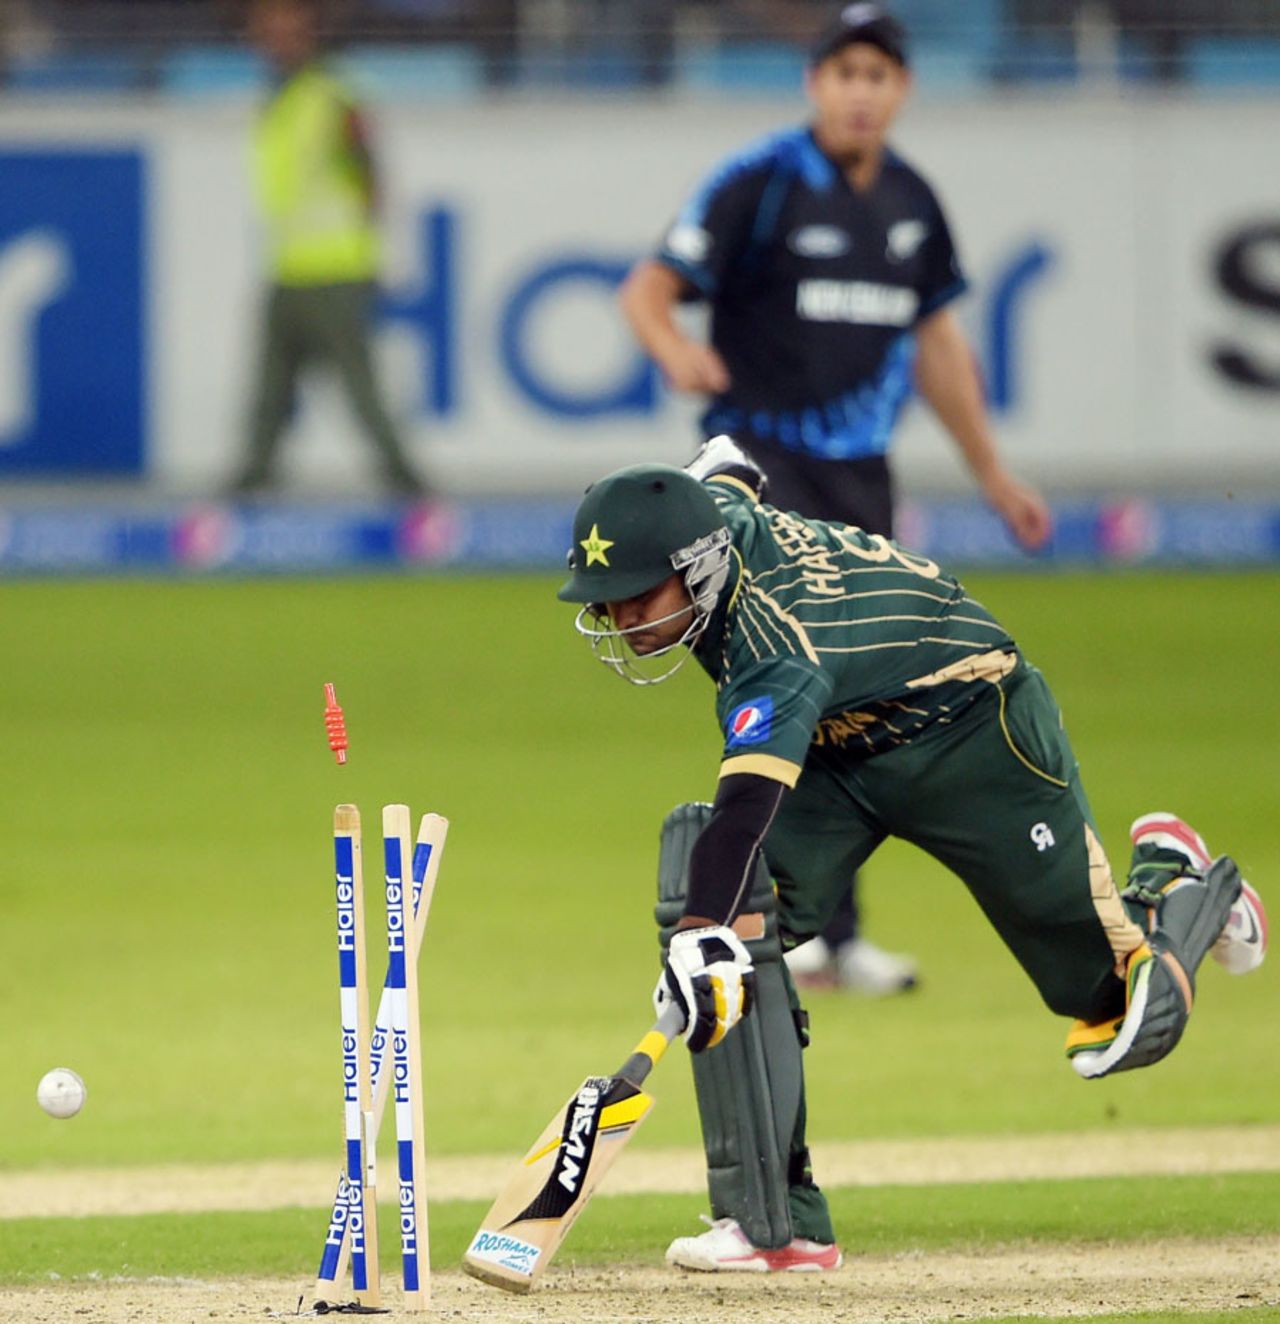 Mohammad Hafeez was run out for 2, Pakistan v New Zealand, 1st T20, Dubai, December 4, 2014